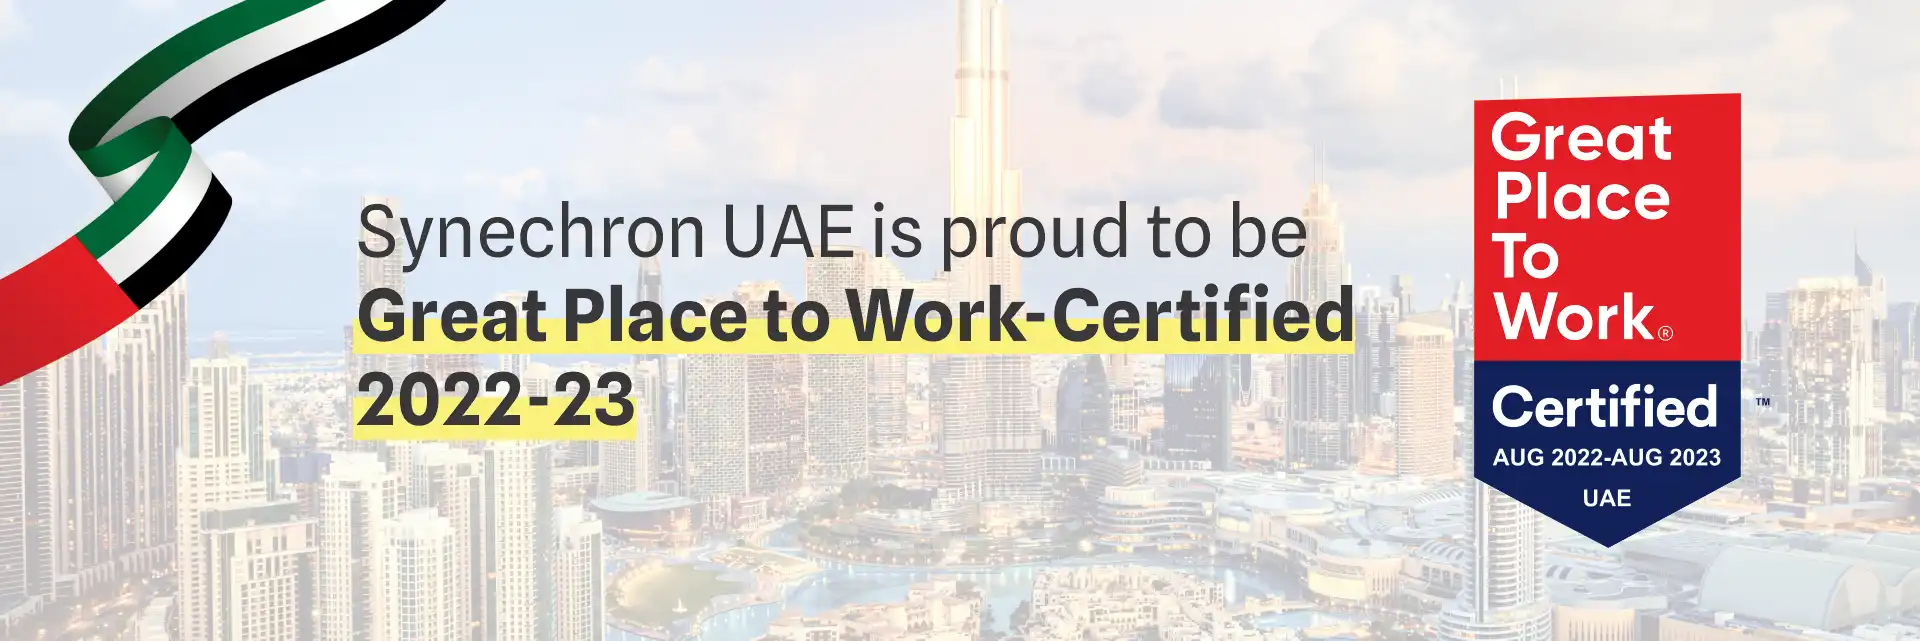 Synechron UAE Recognized with a Prestigious Great Place To Work® 2022 Certification